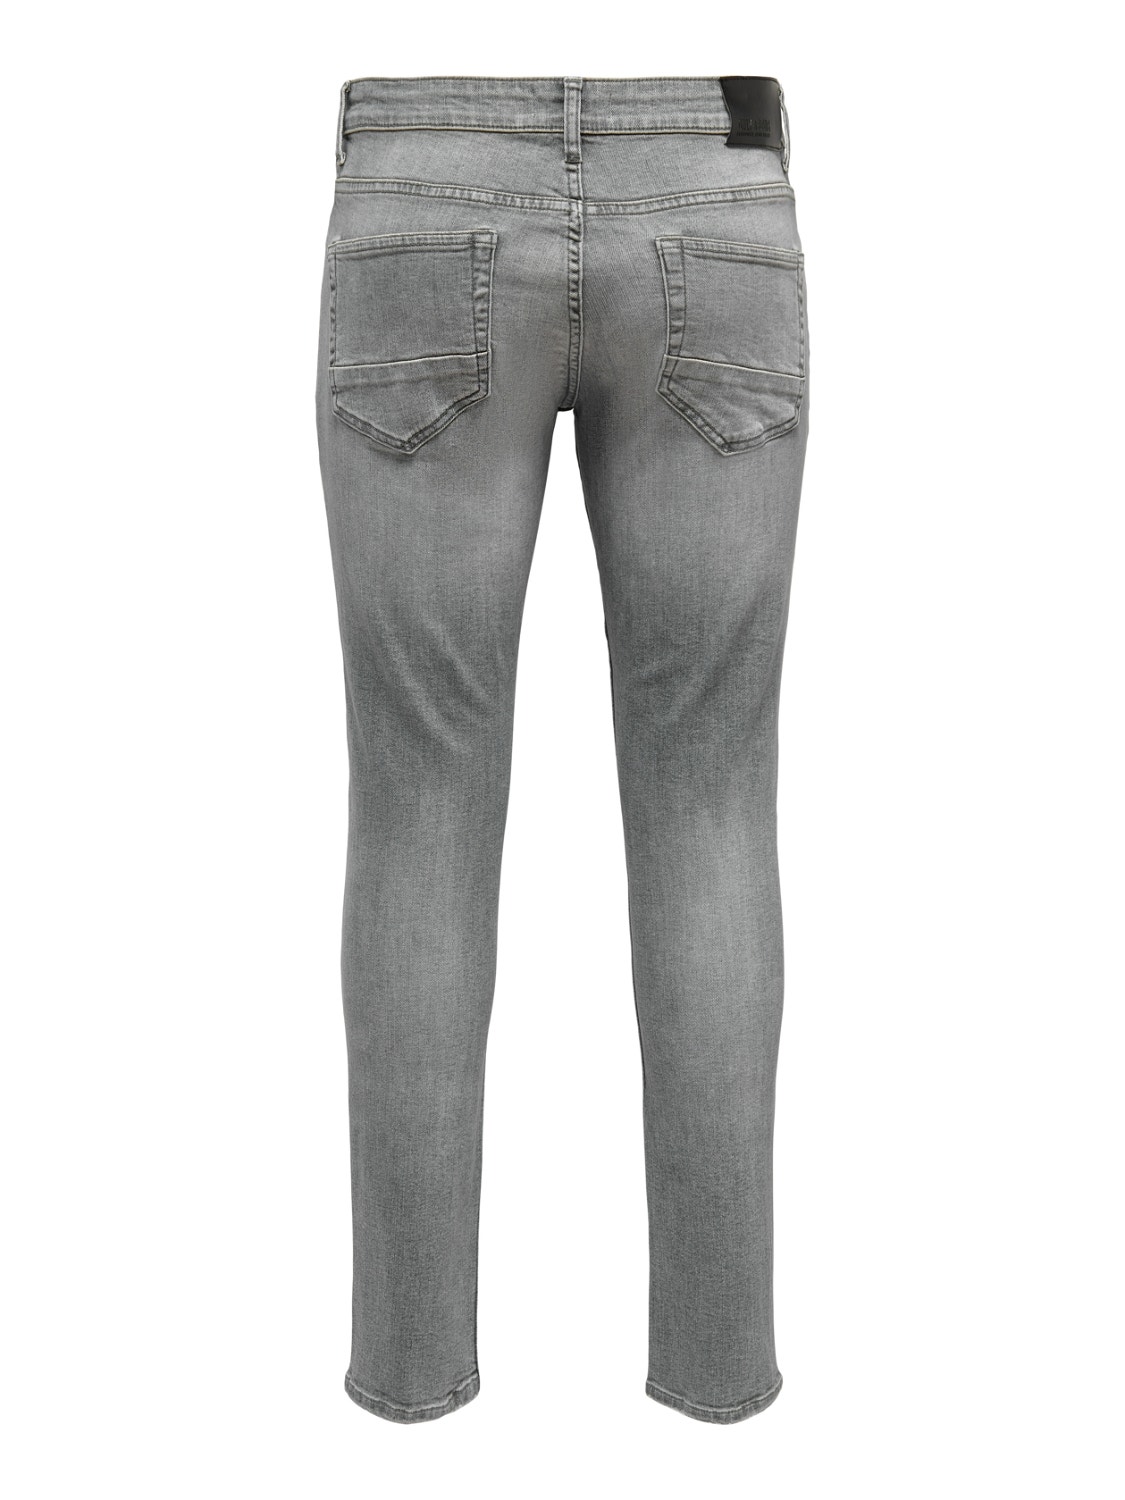 ONLY & SONS Slim Fit Low rise Jeans -Grey Denim - 22023227